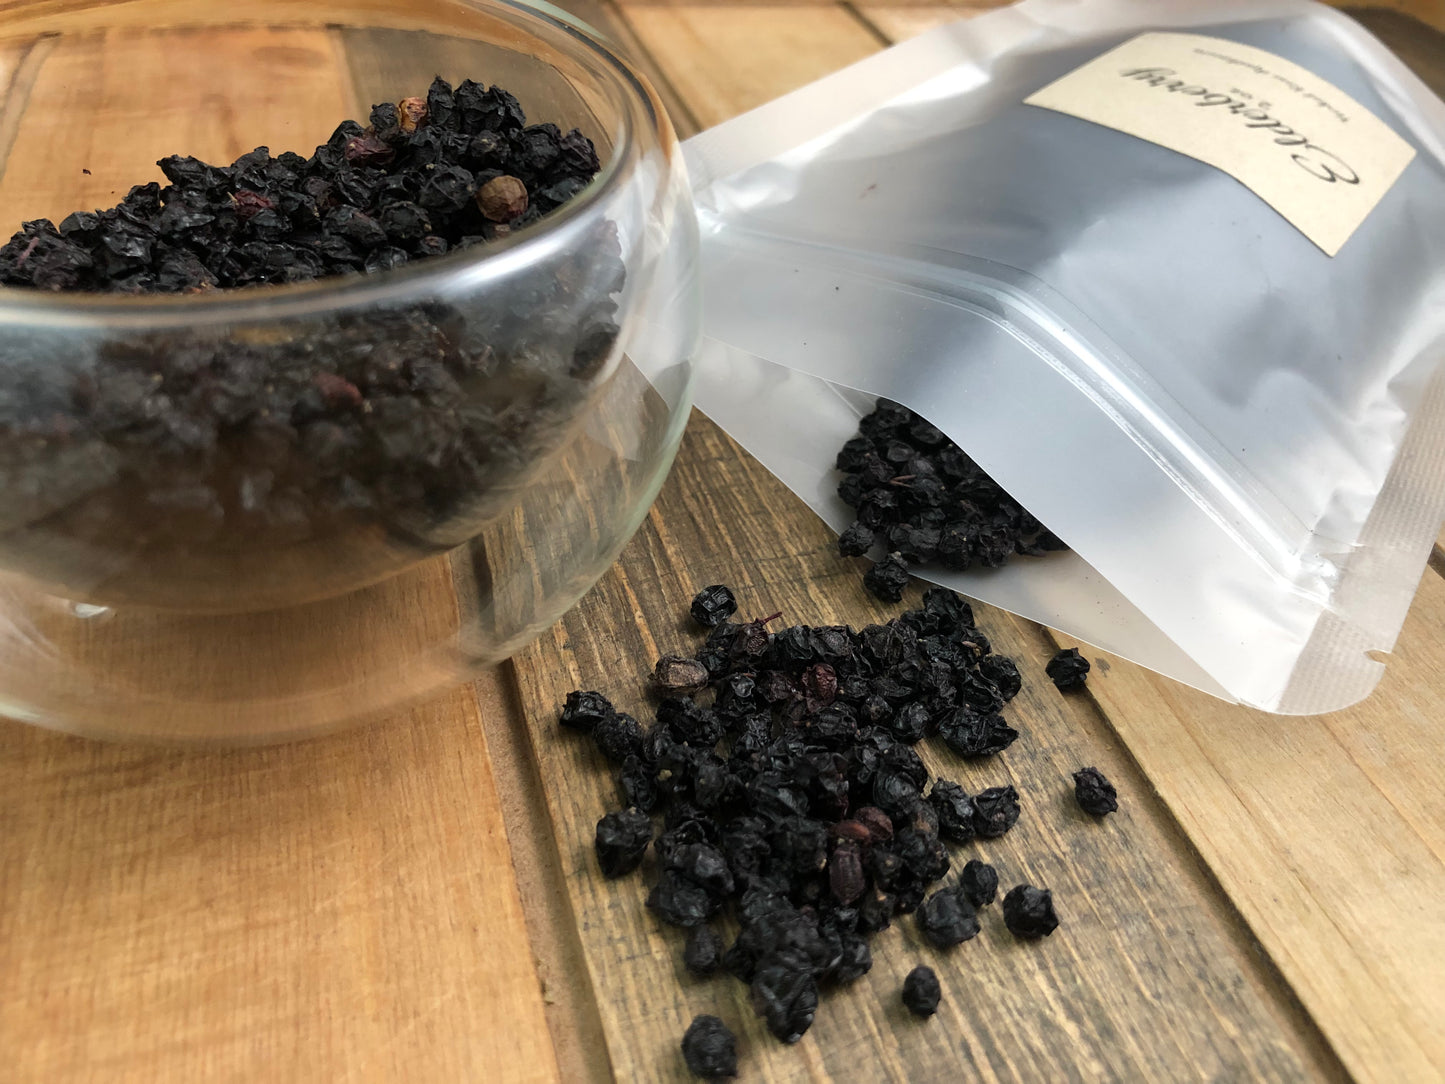 image of dried elderberries spilling out of clear bag next to a clear glass cup with dried elderberries, on a wooden table